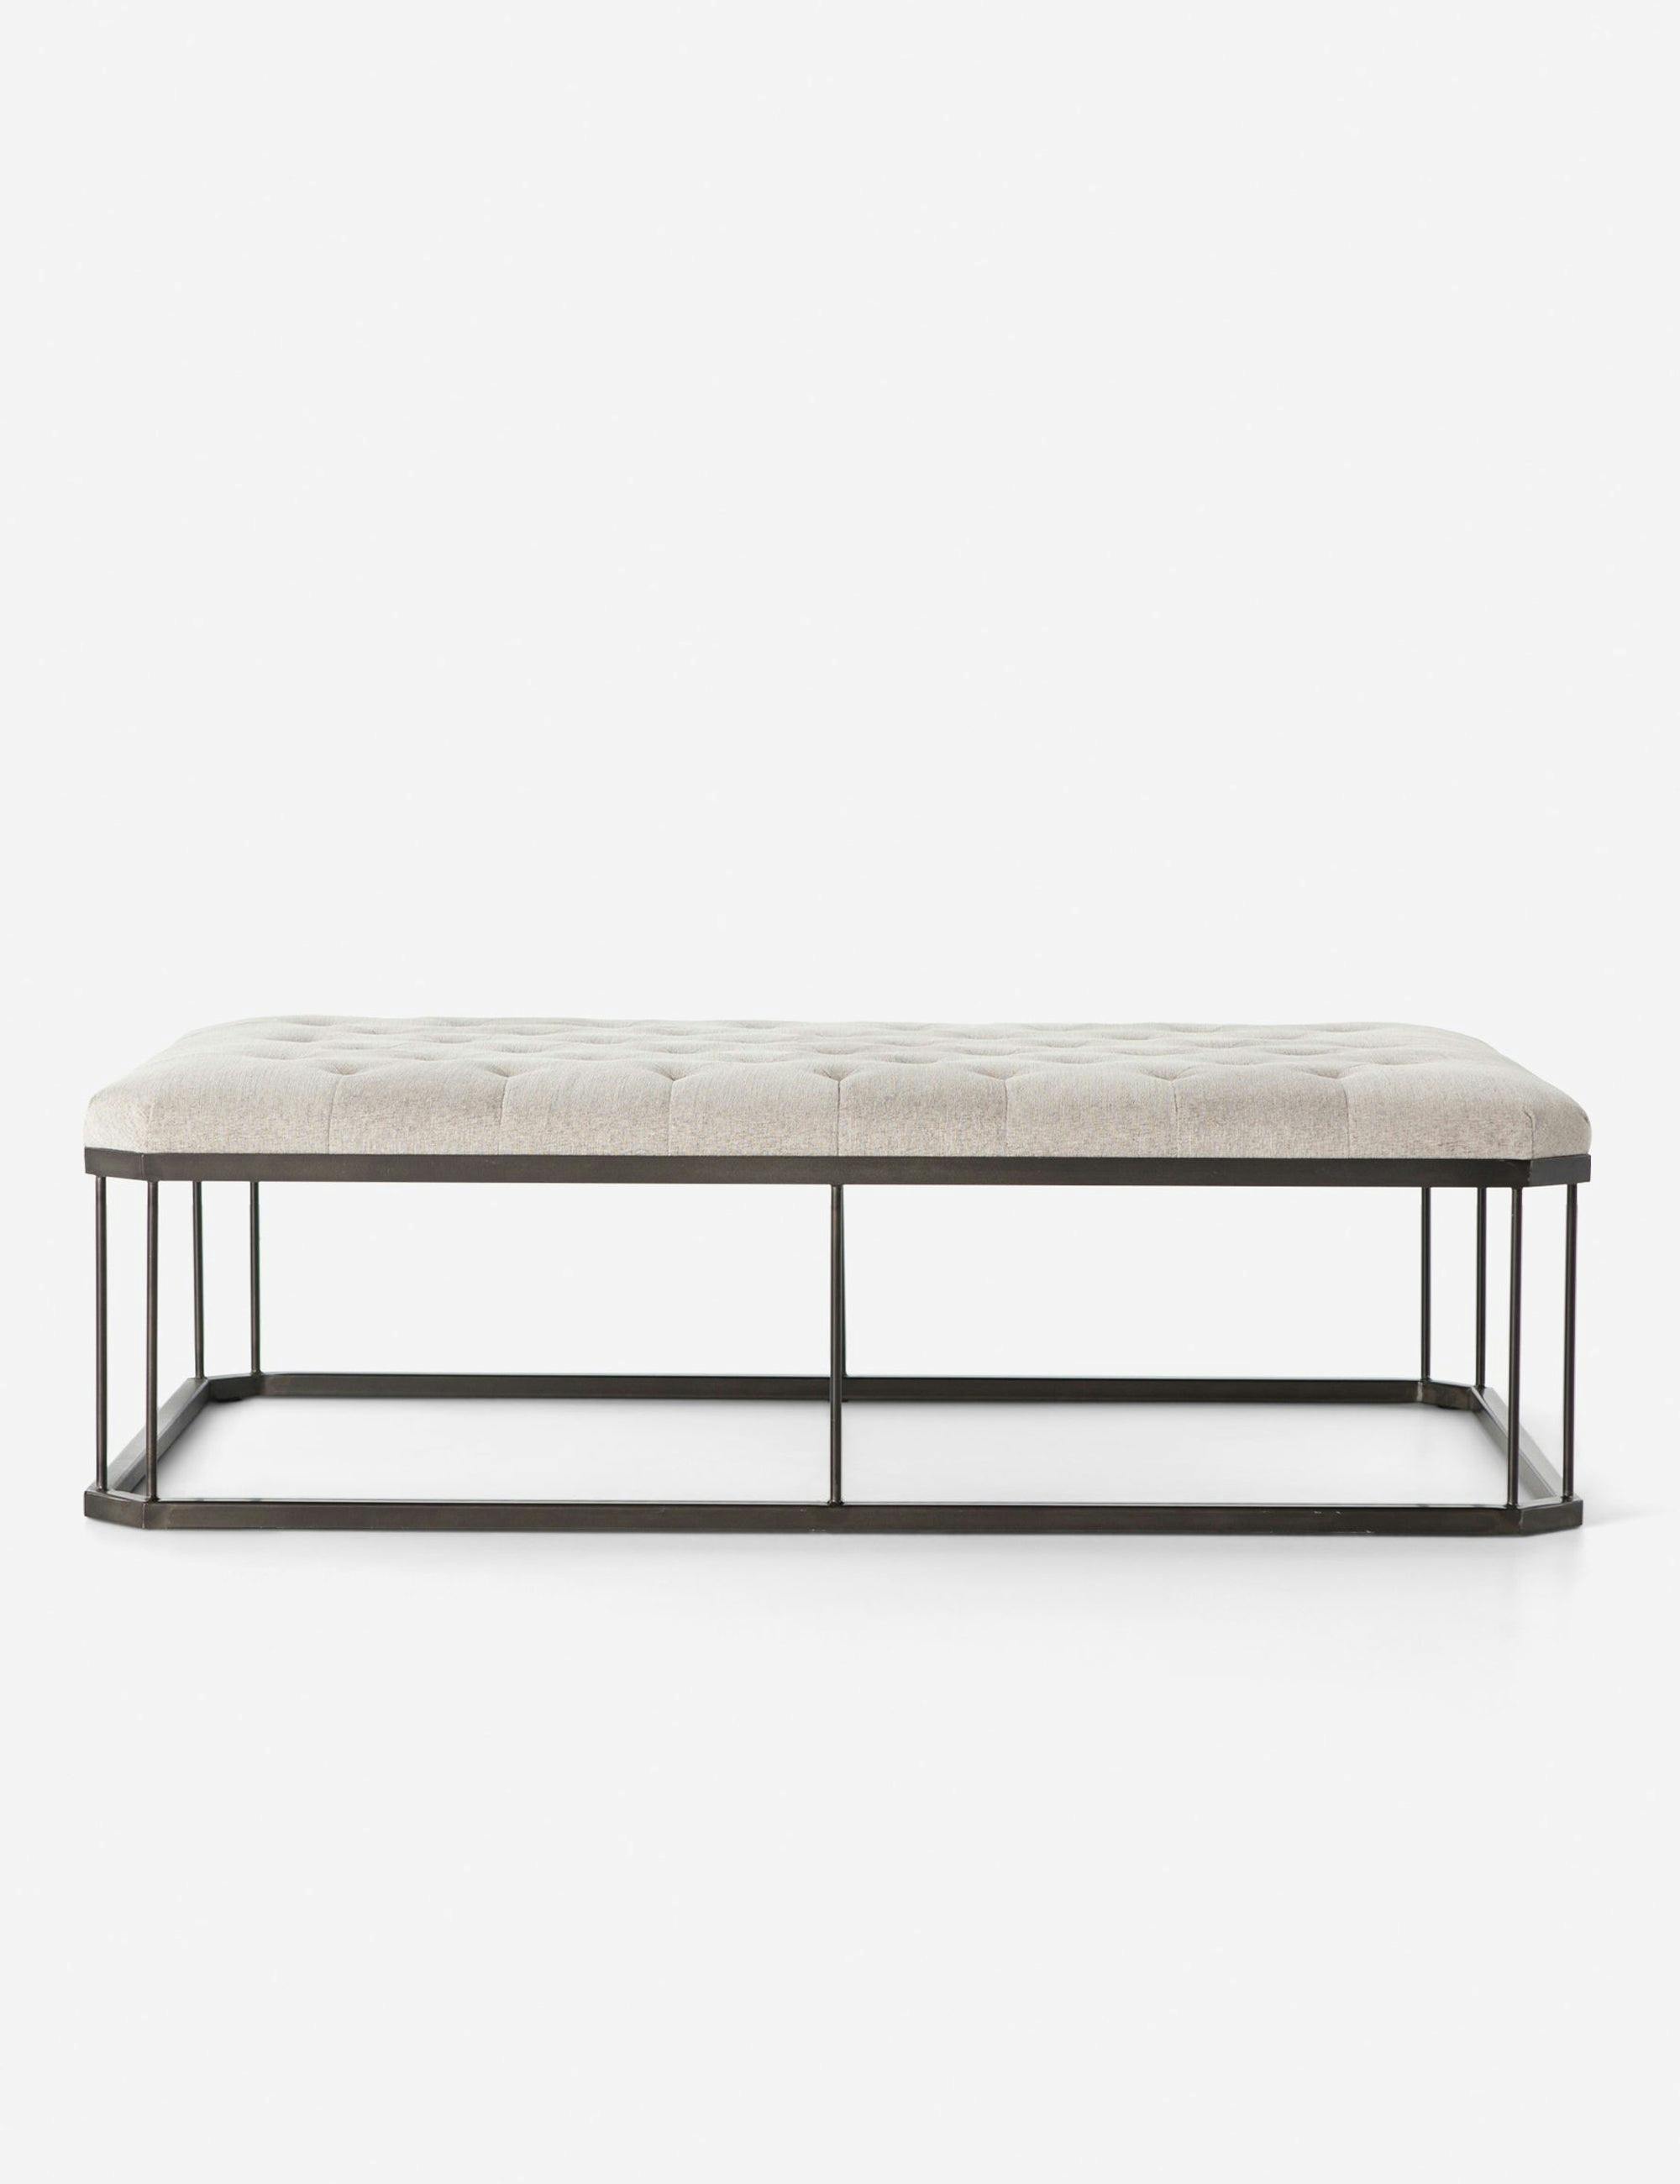 Karley Diamond-Tufted Polyester Ottoman in Cool Gray